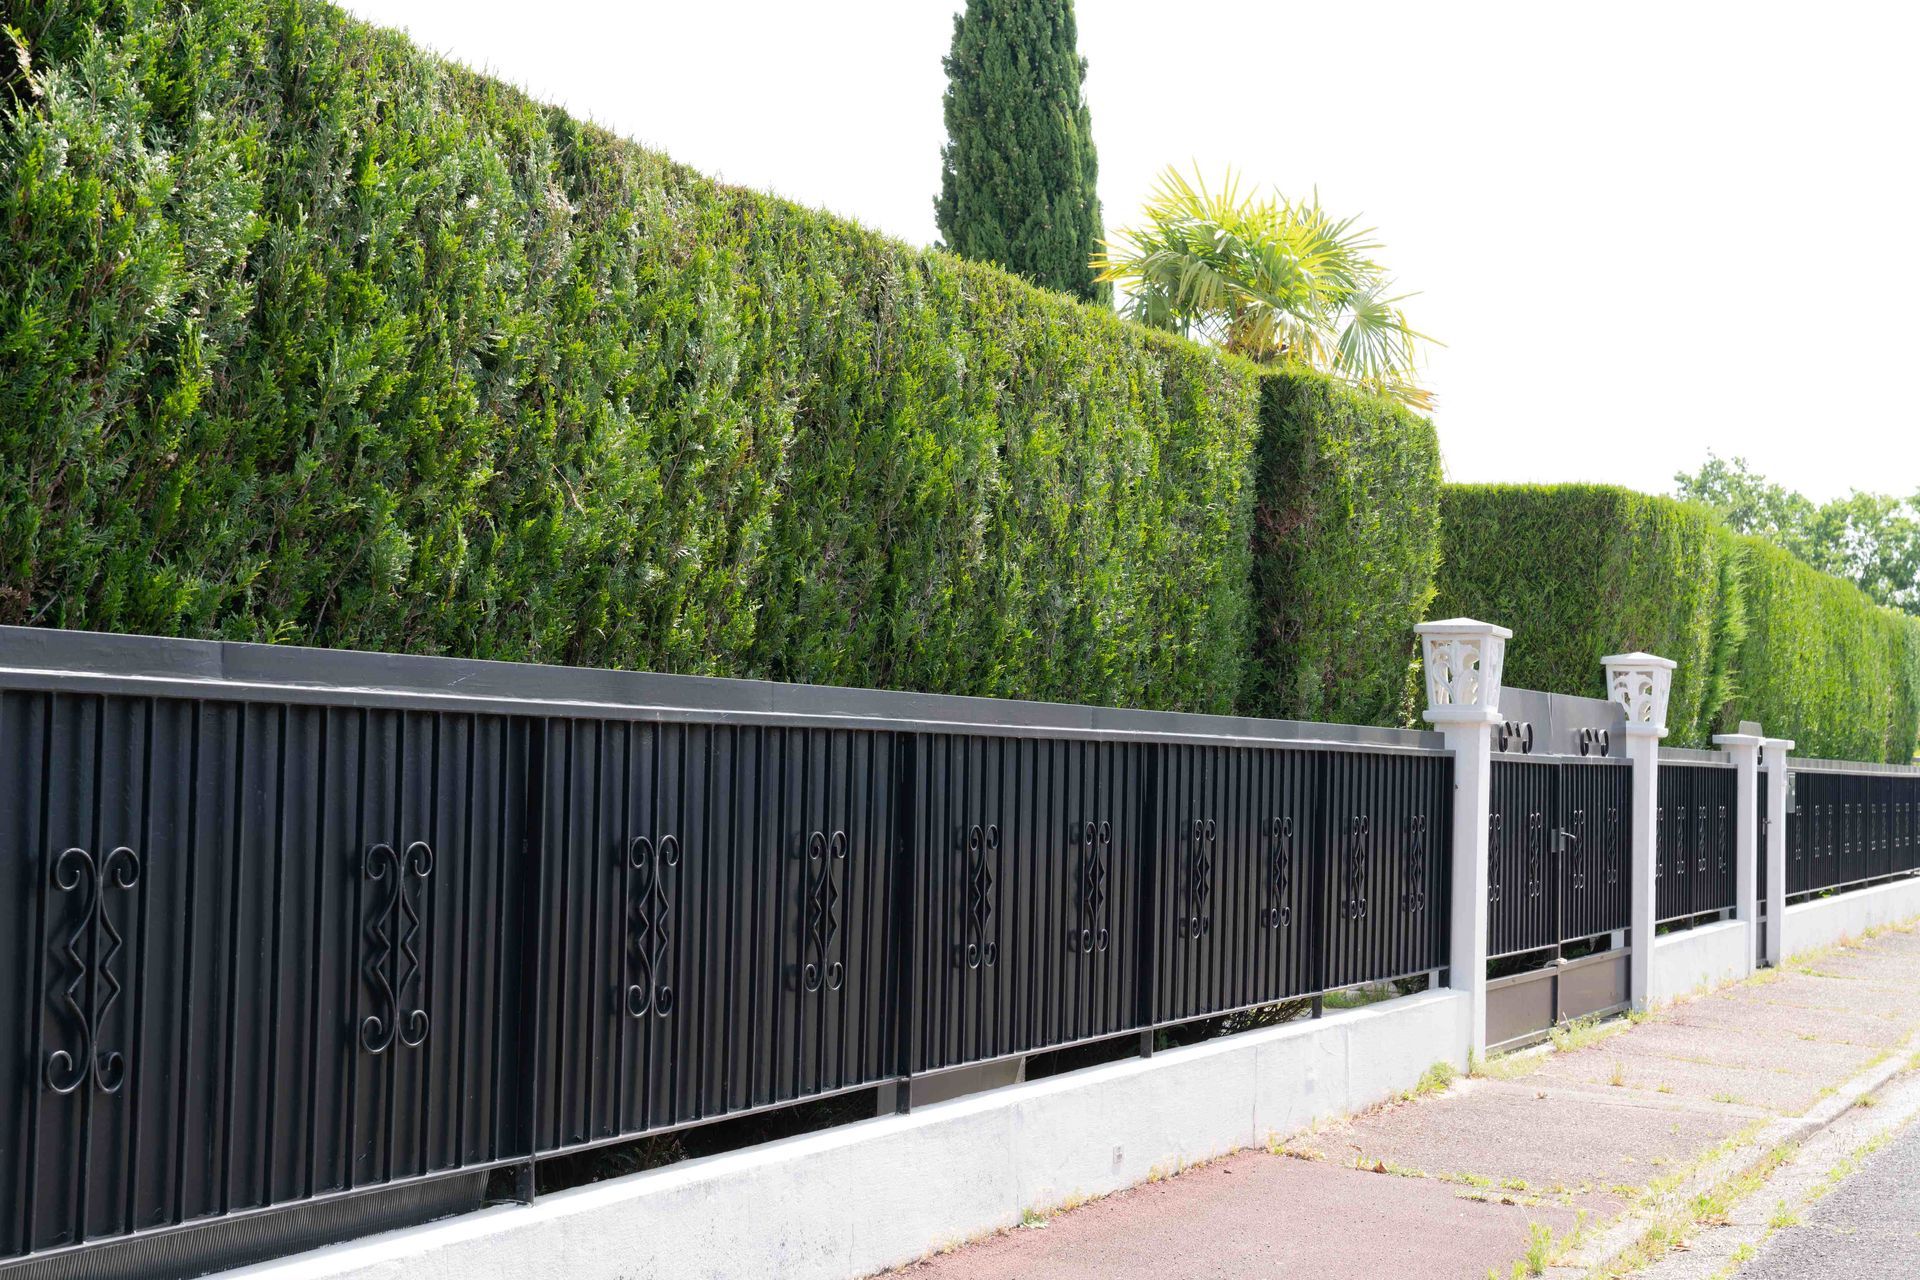 An iron gate in front of a row of tall, squared hedges